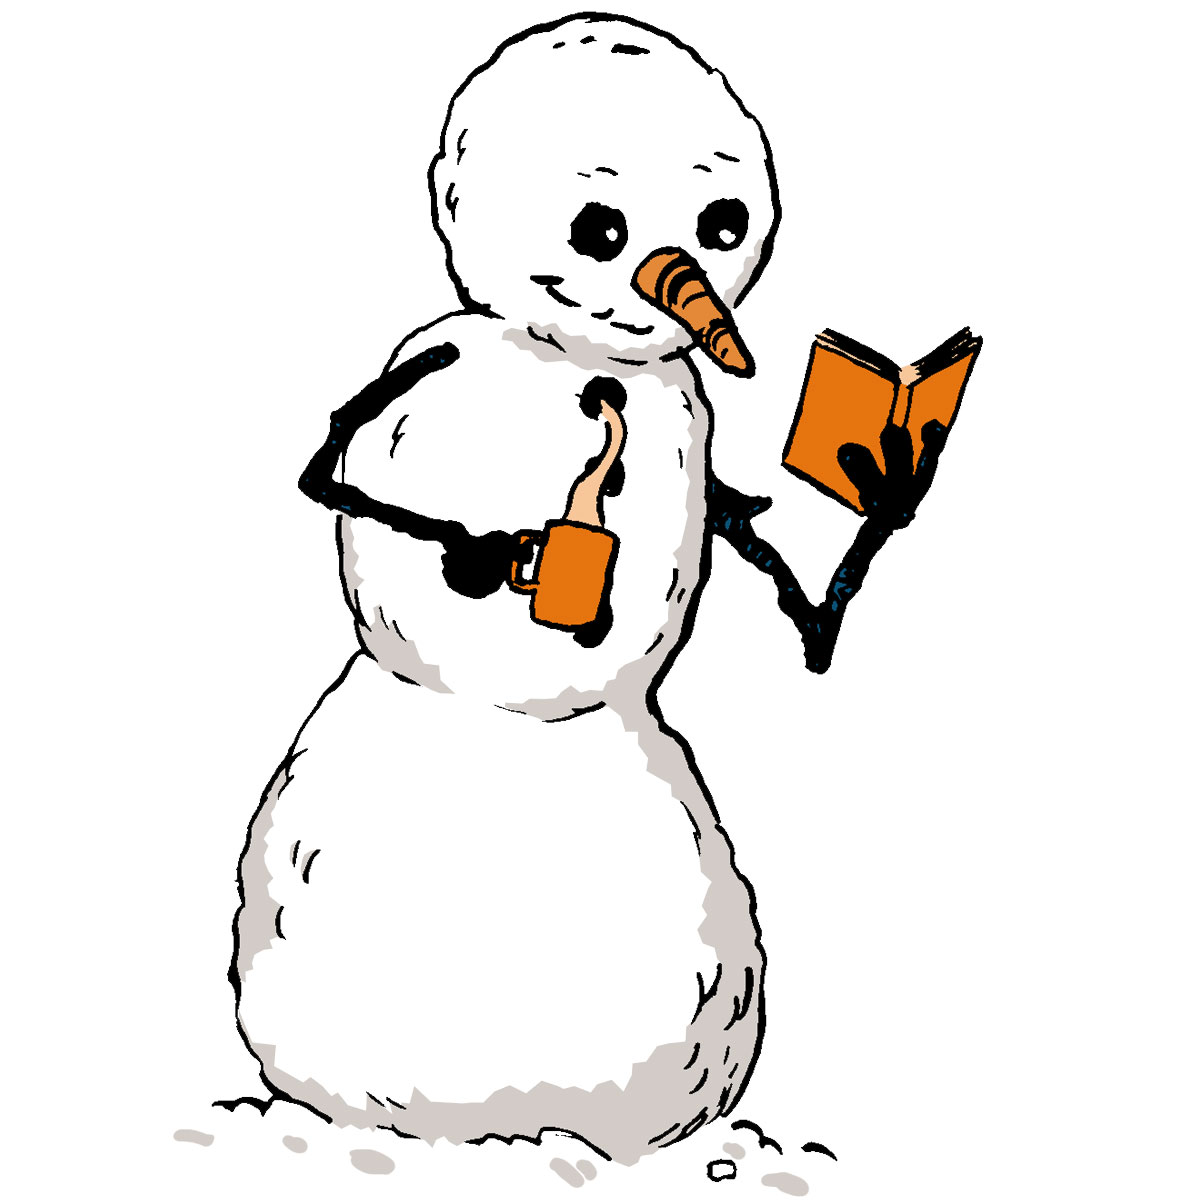 a snowman reading a comic and enjoying a warm beverage